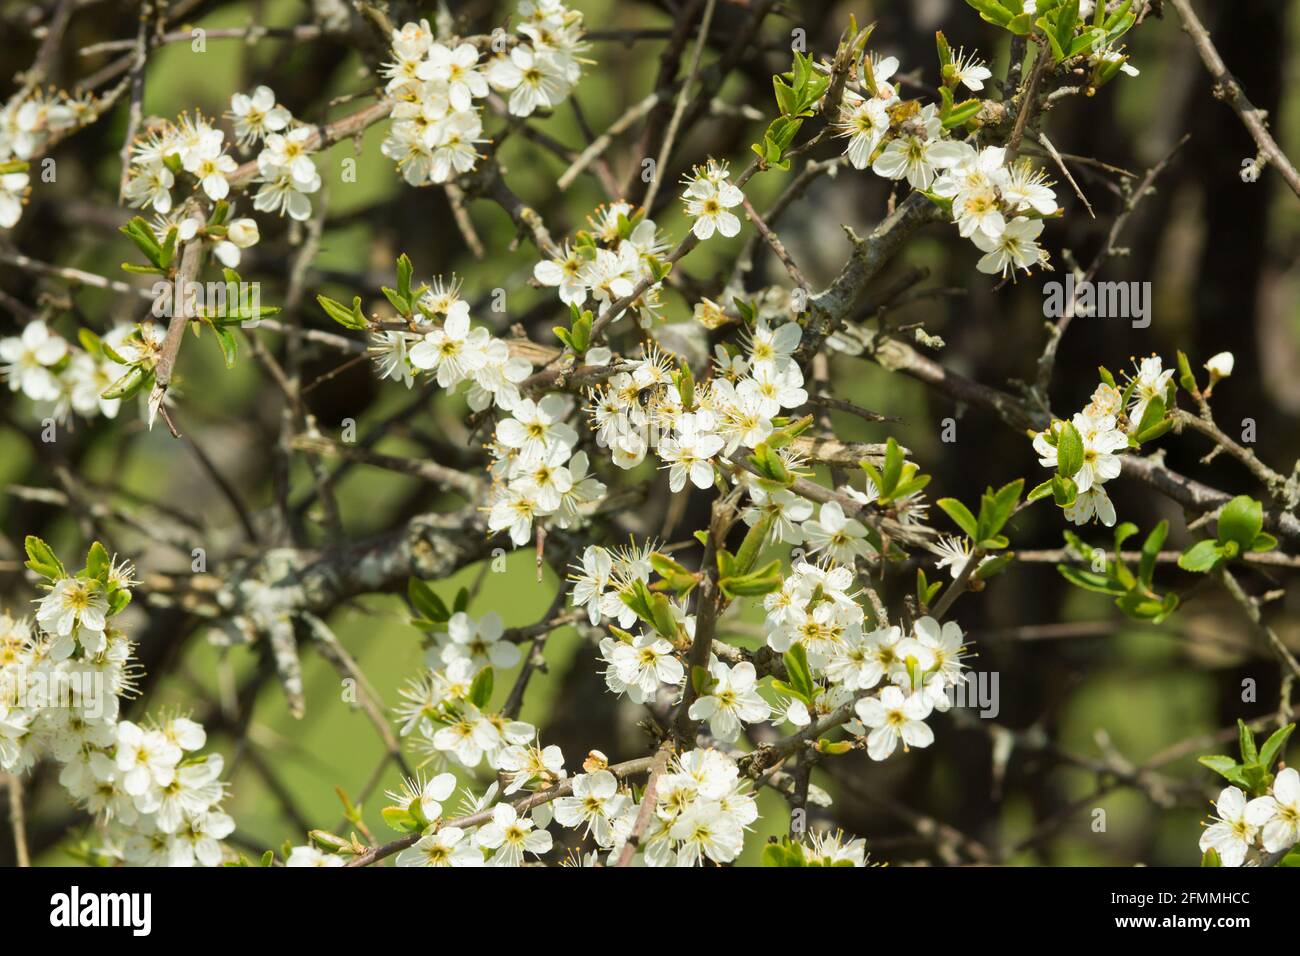 Blackthorn or prunus spinosa blossoms in late April a wild shrub native to the UK and Europe it produces sloe berries in late autumn Stock Photo